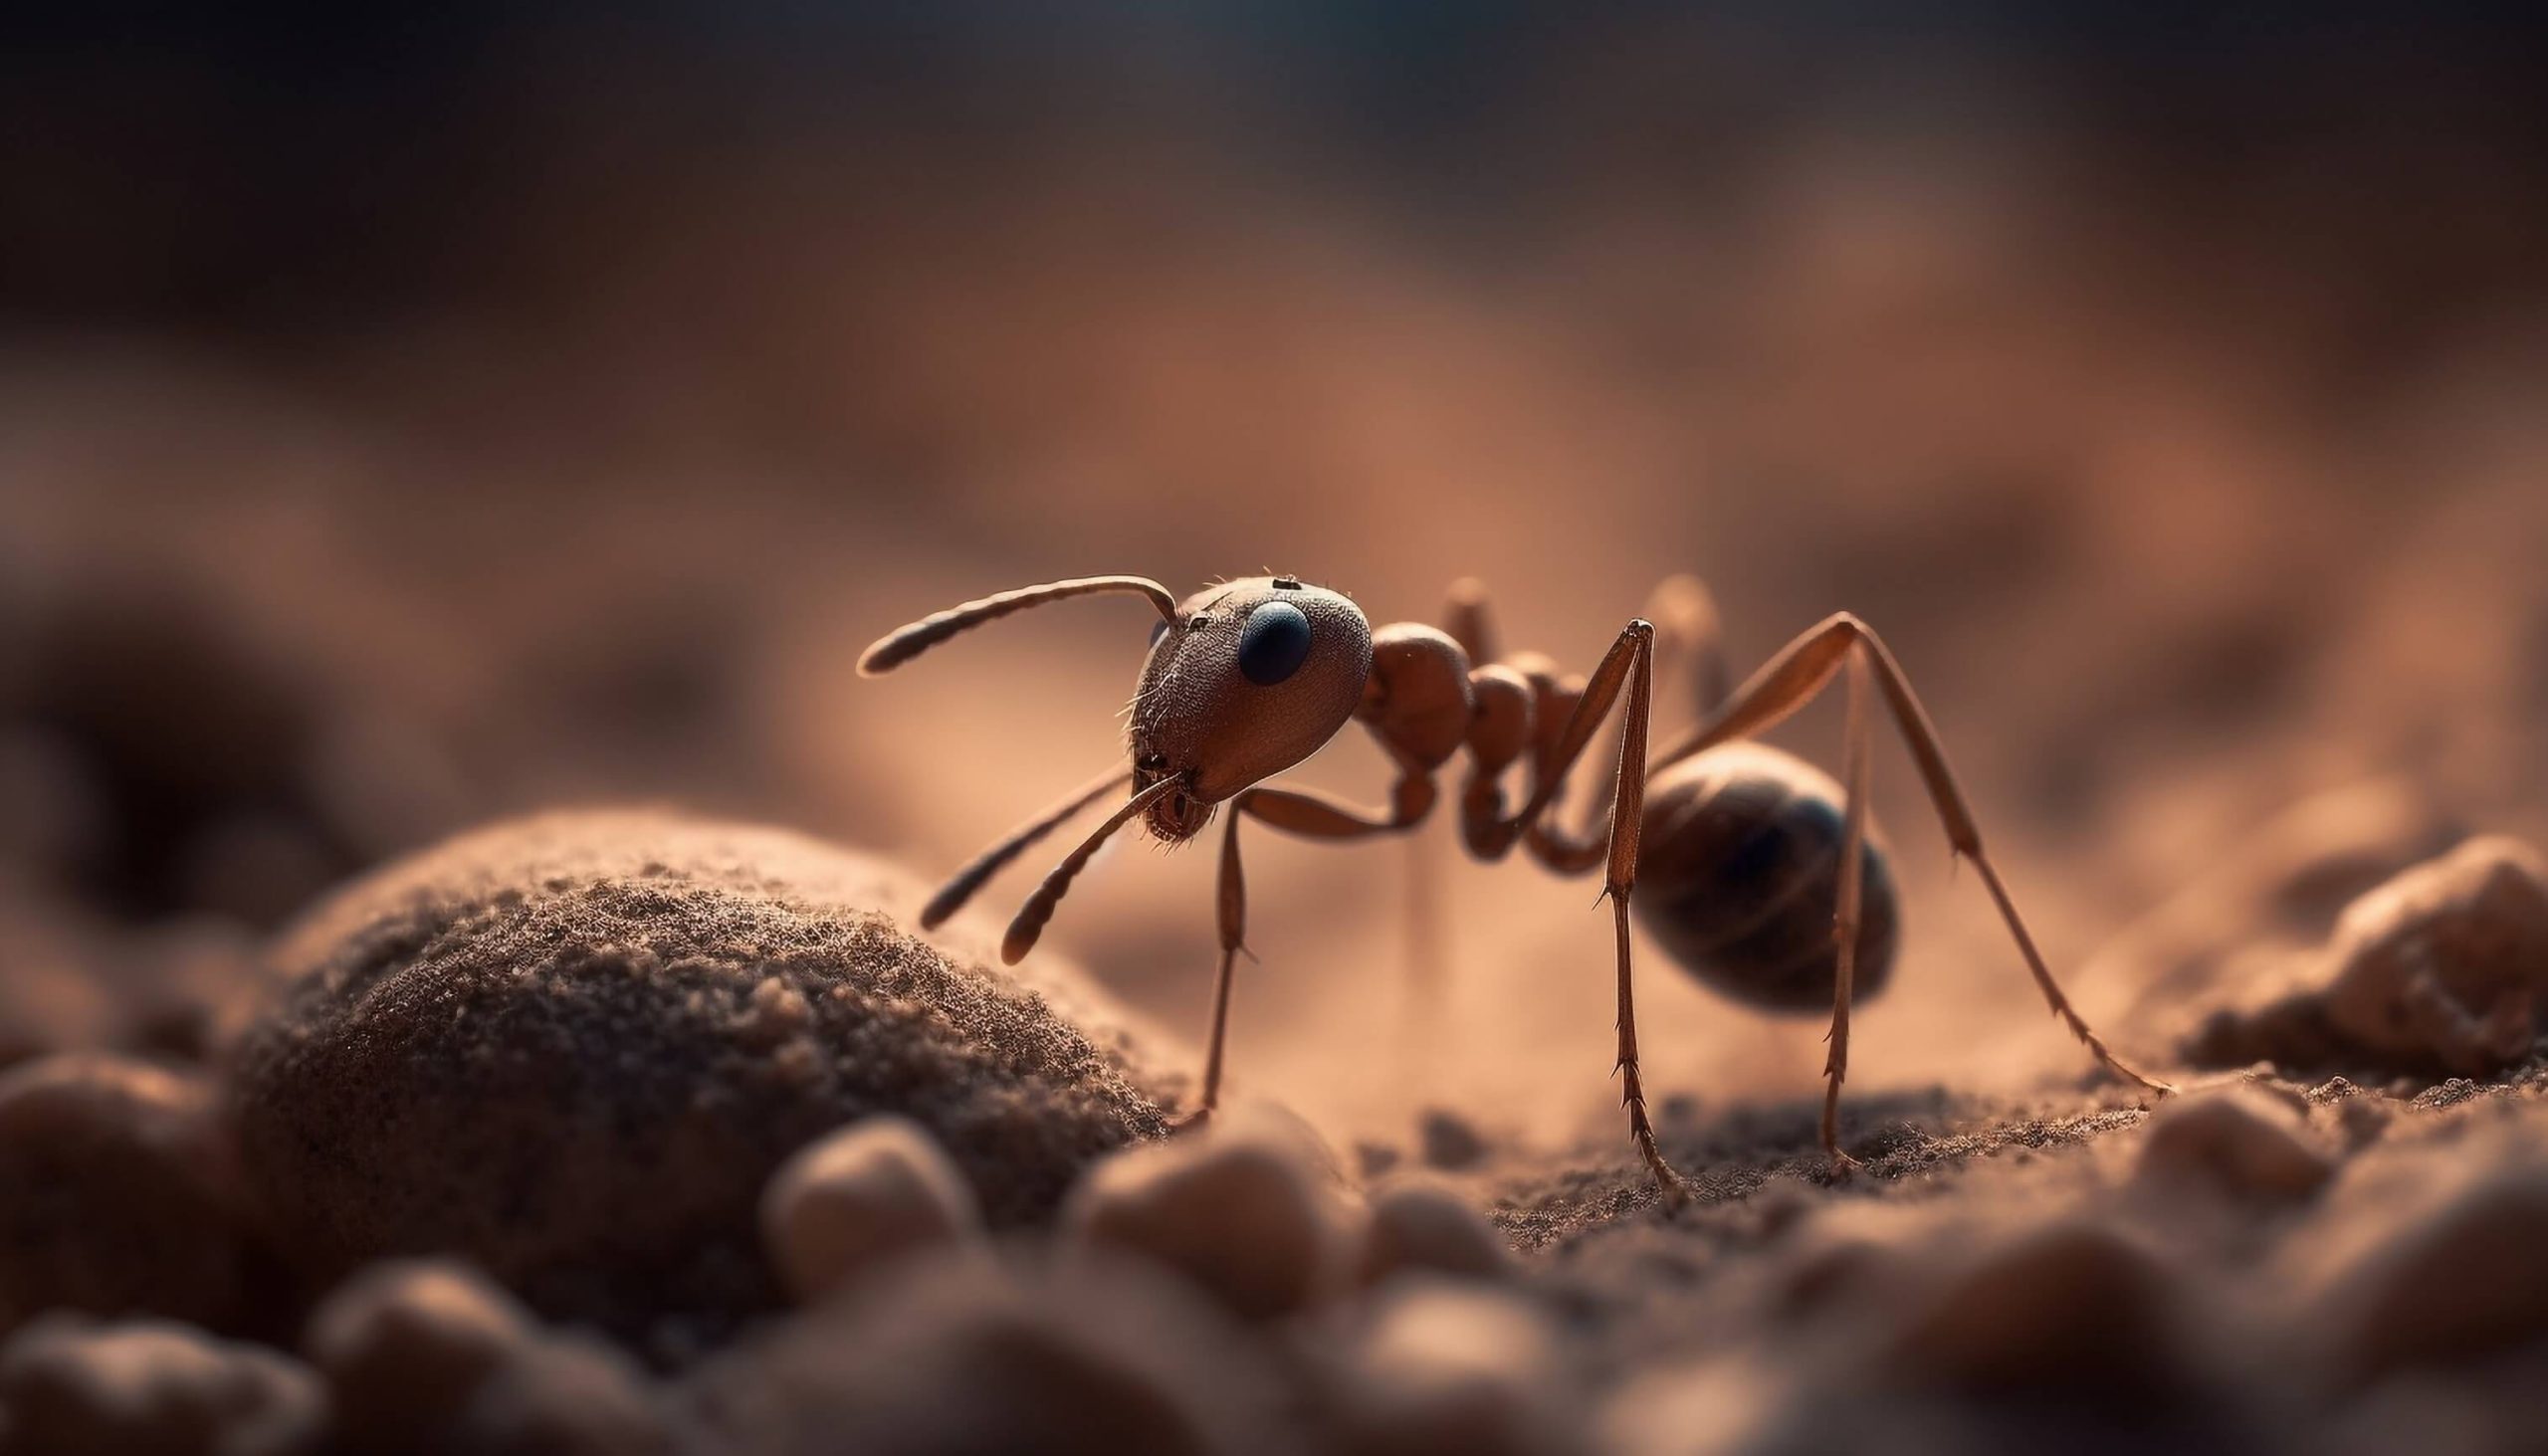 a close up photo of an ant